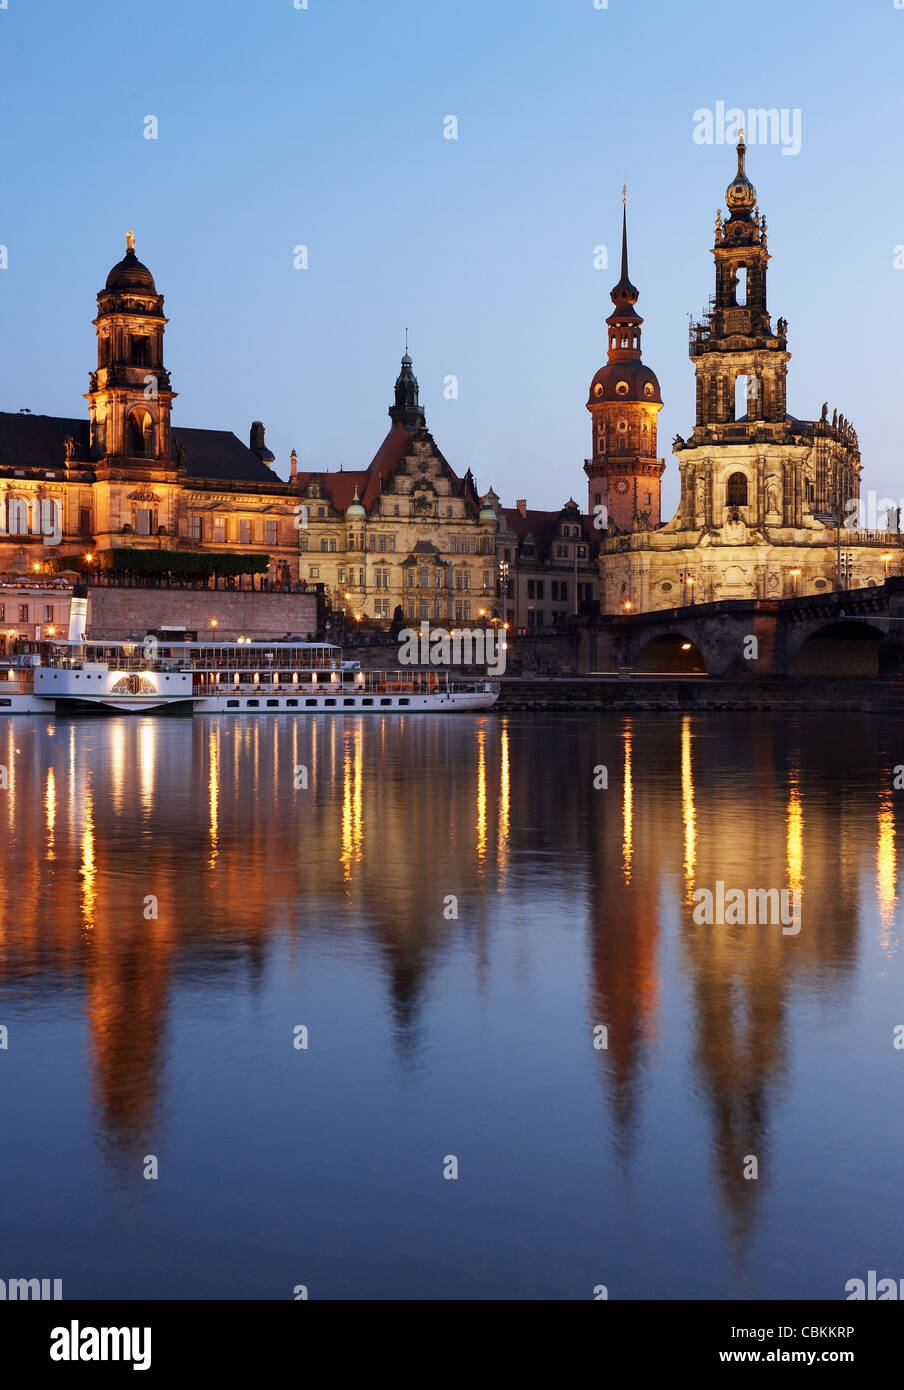 Katholische Hofkirche and River Elbe, Dresden, Free State of Saxony, Germany Stock Photo